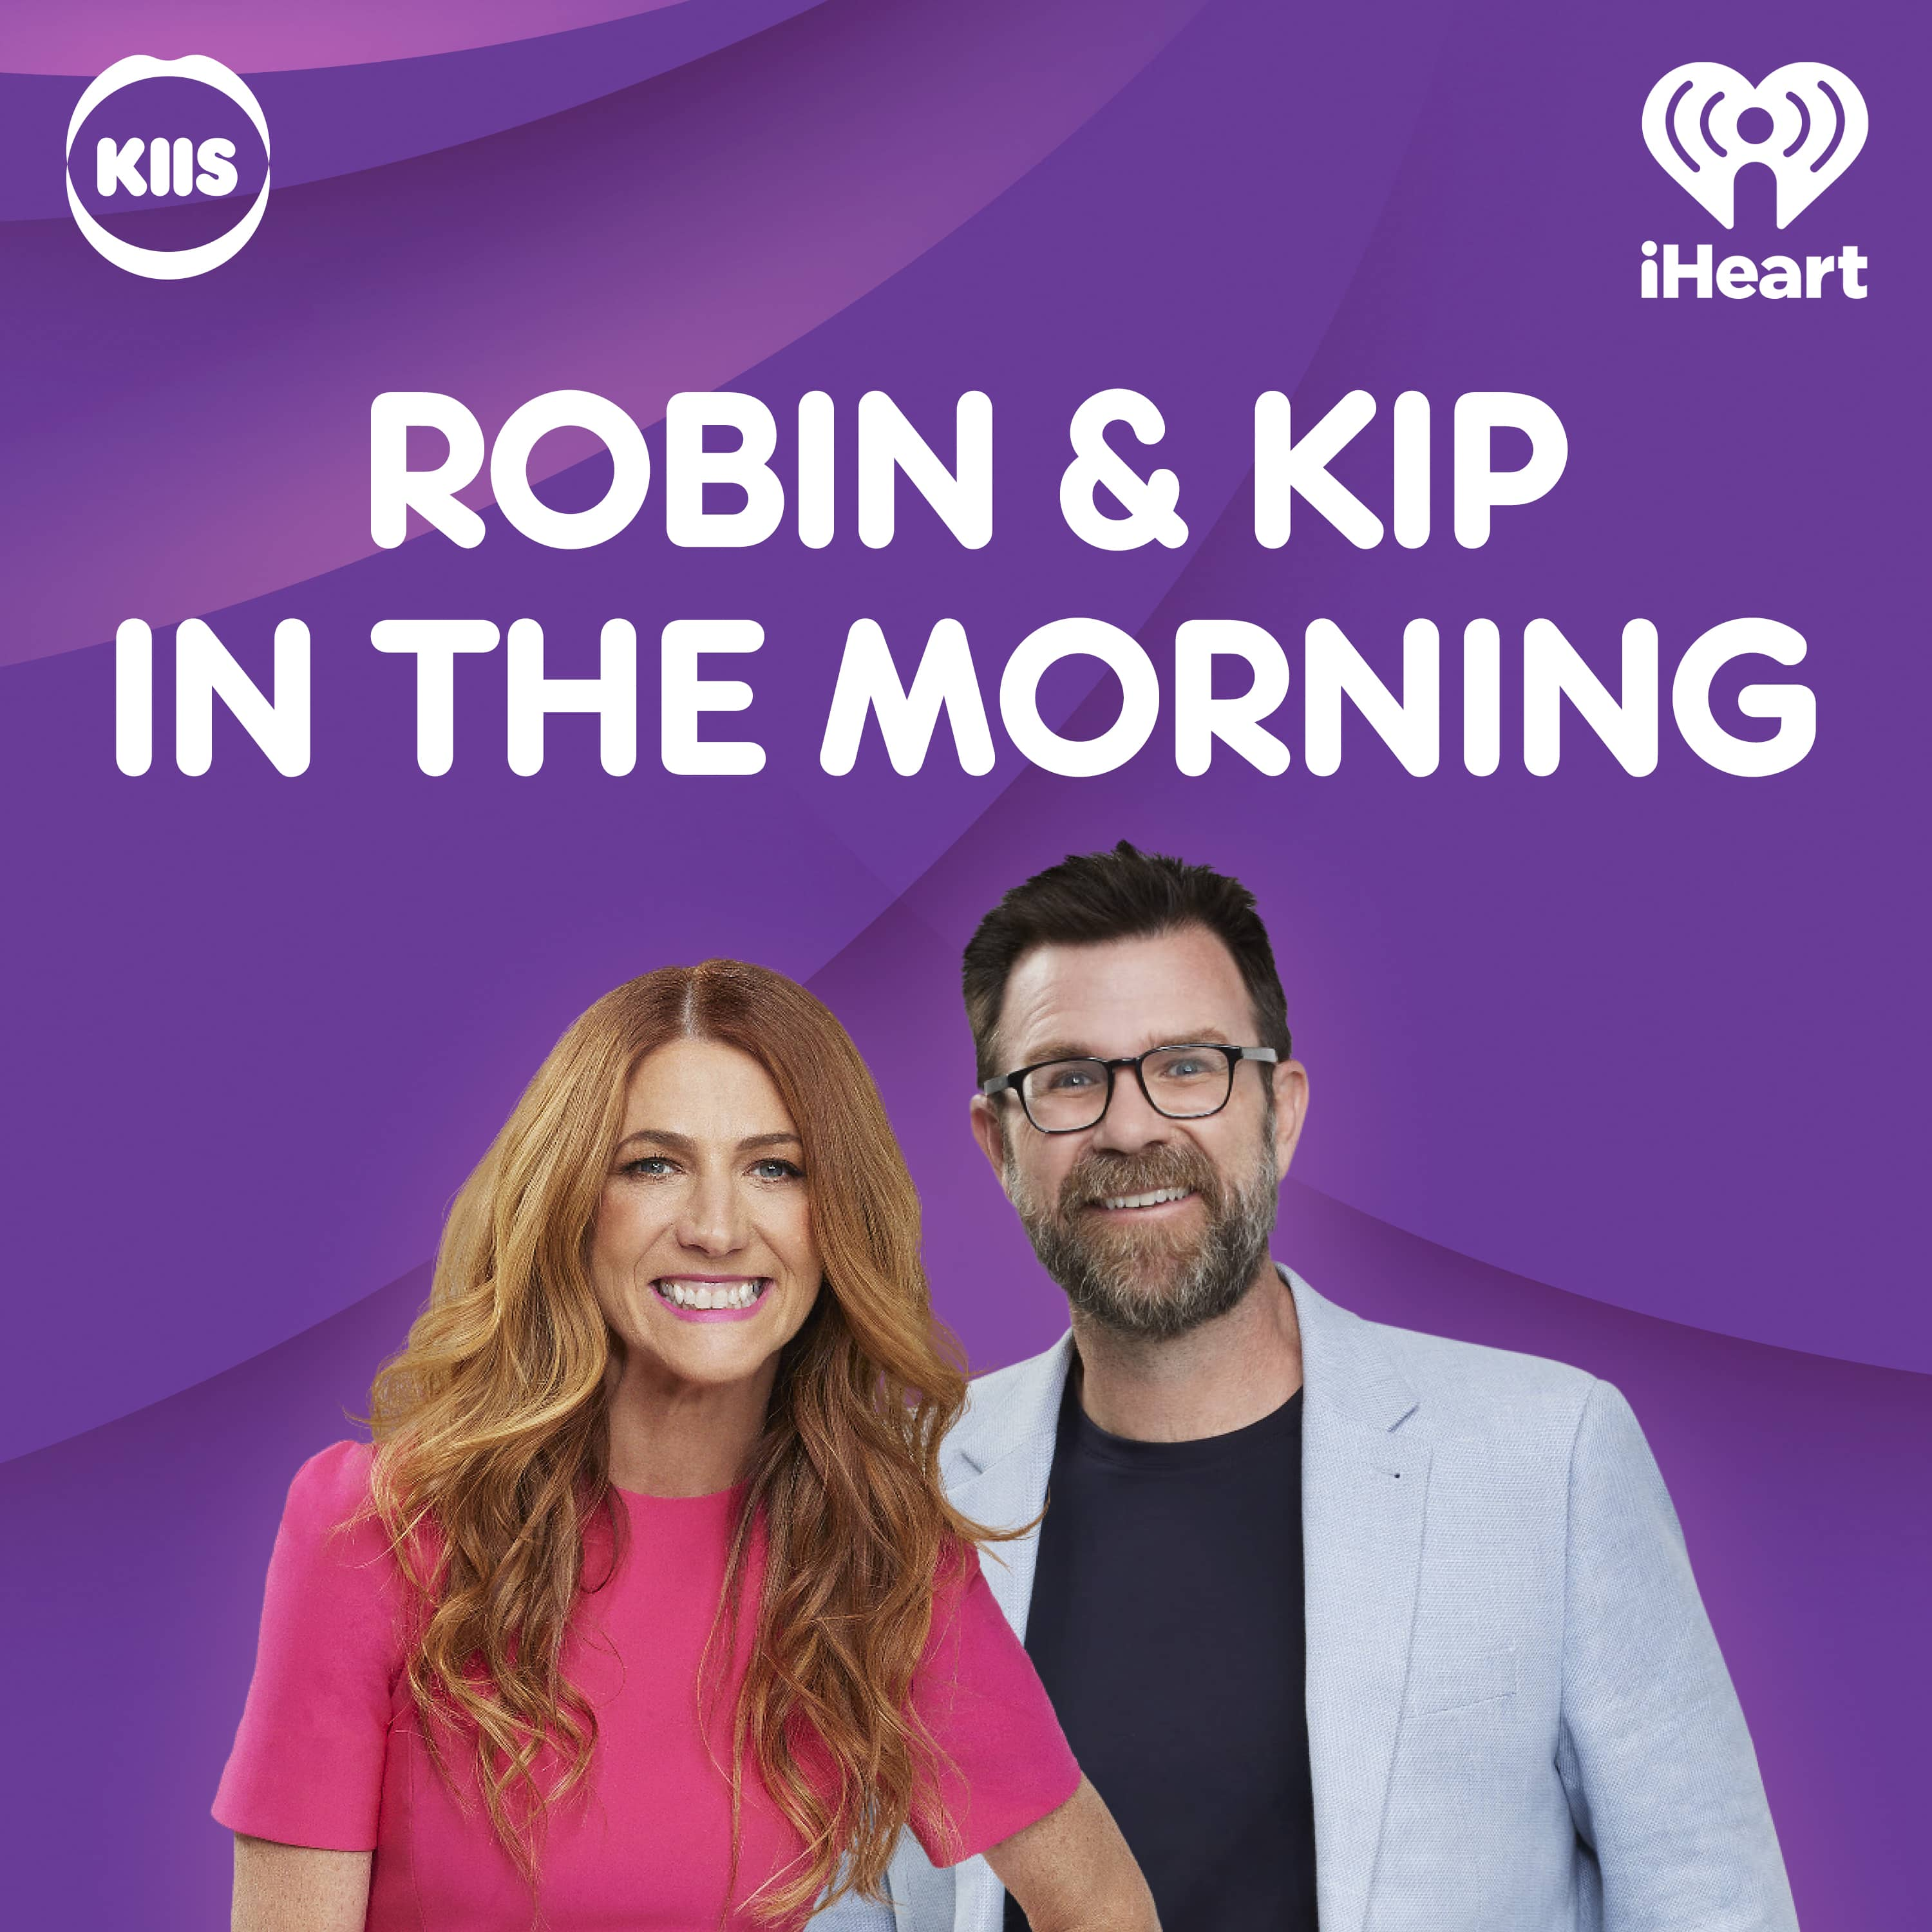 🔊 The KIIS $200K Noise - All The Wrong Guesses